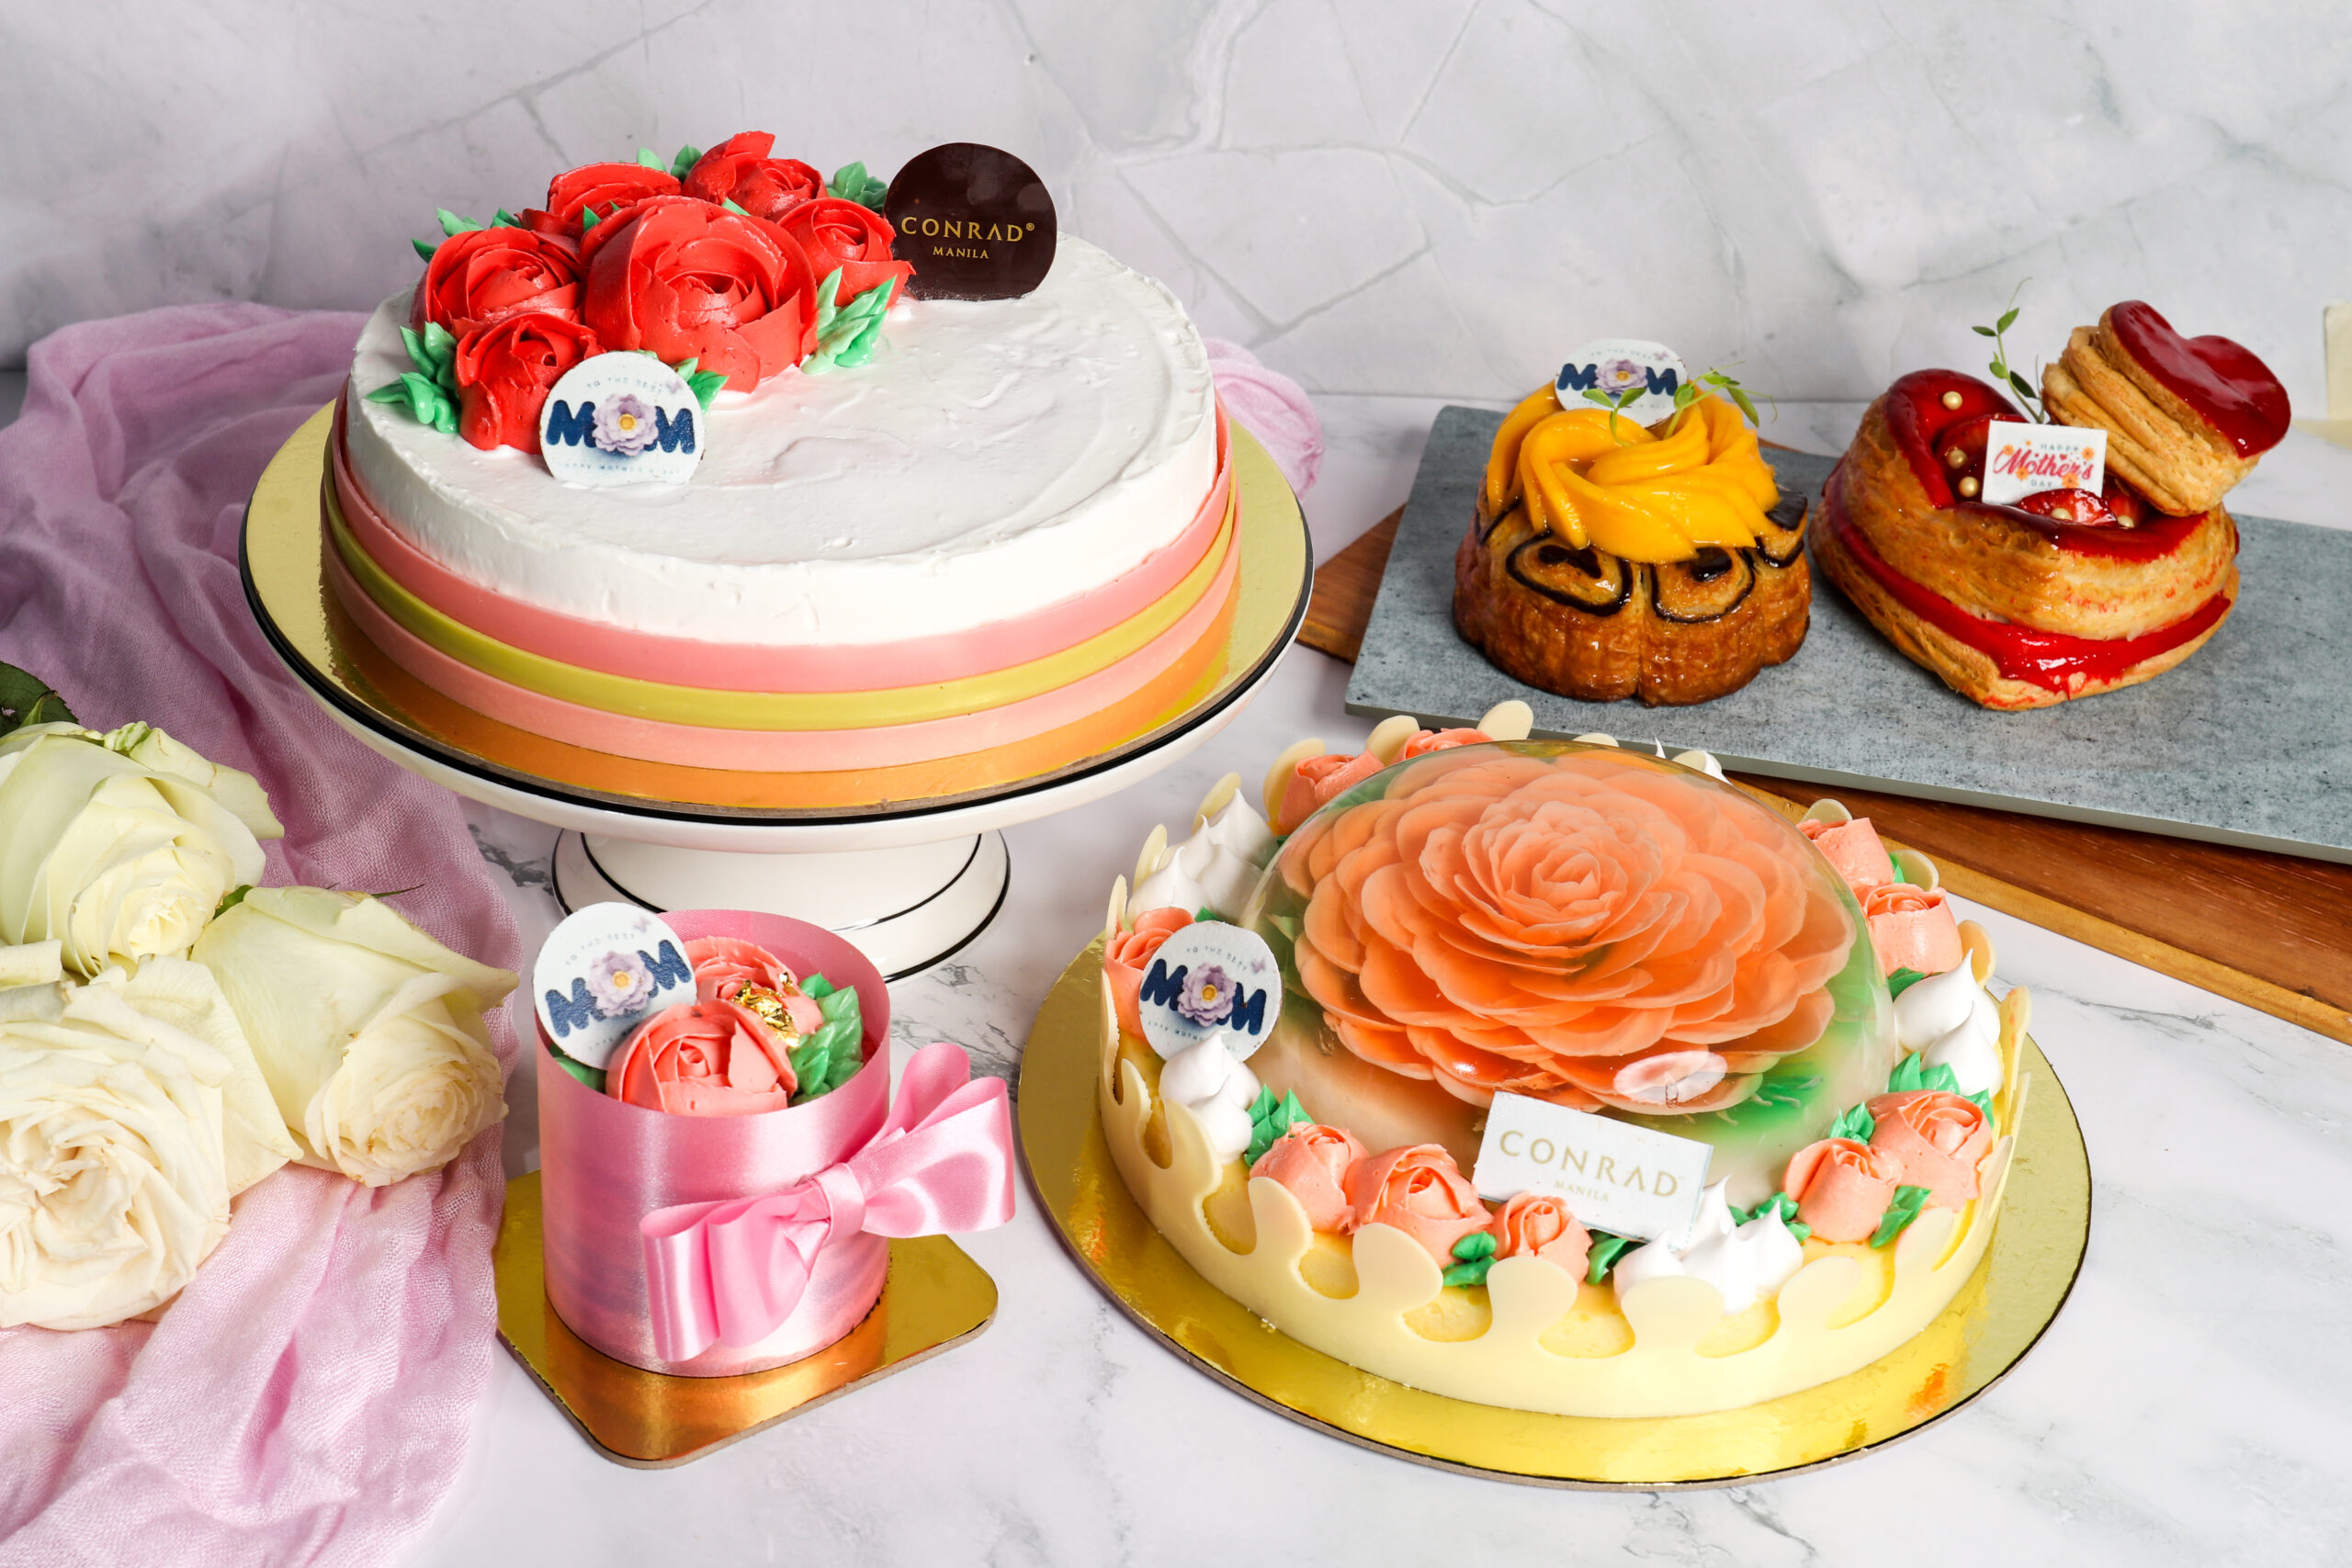 Say it with floral cakes this Mother’s Day